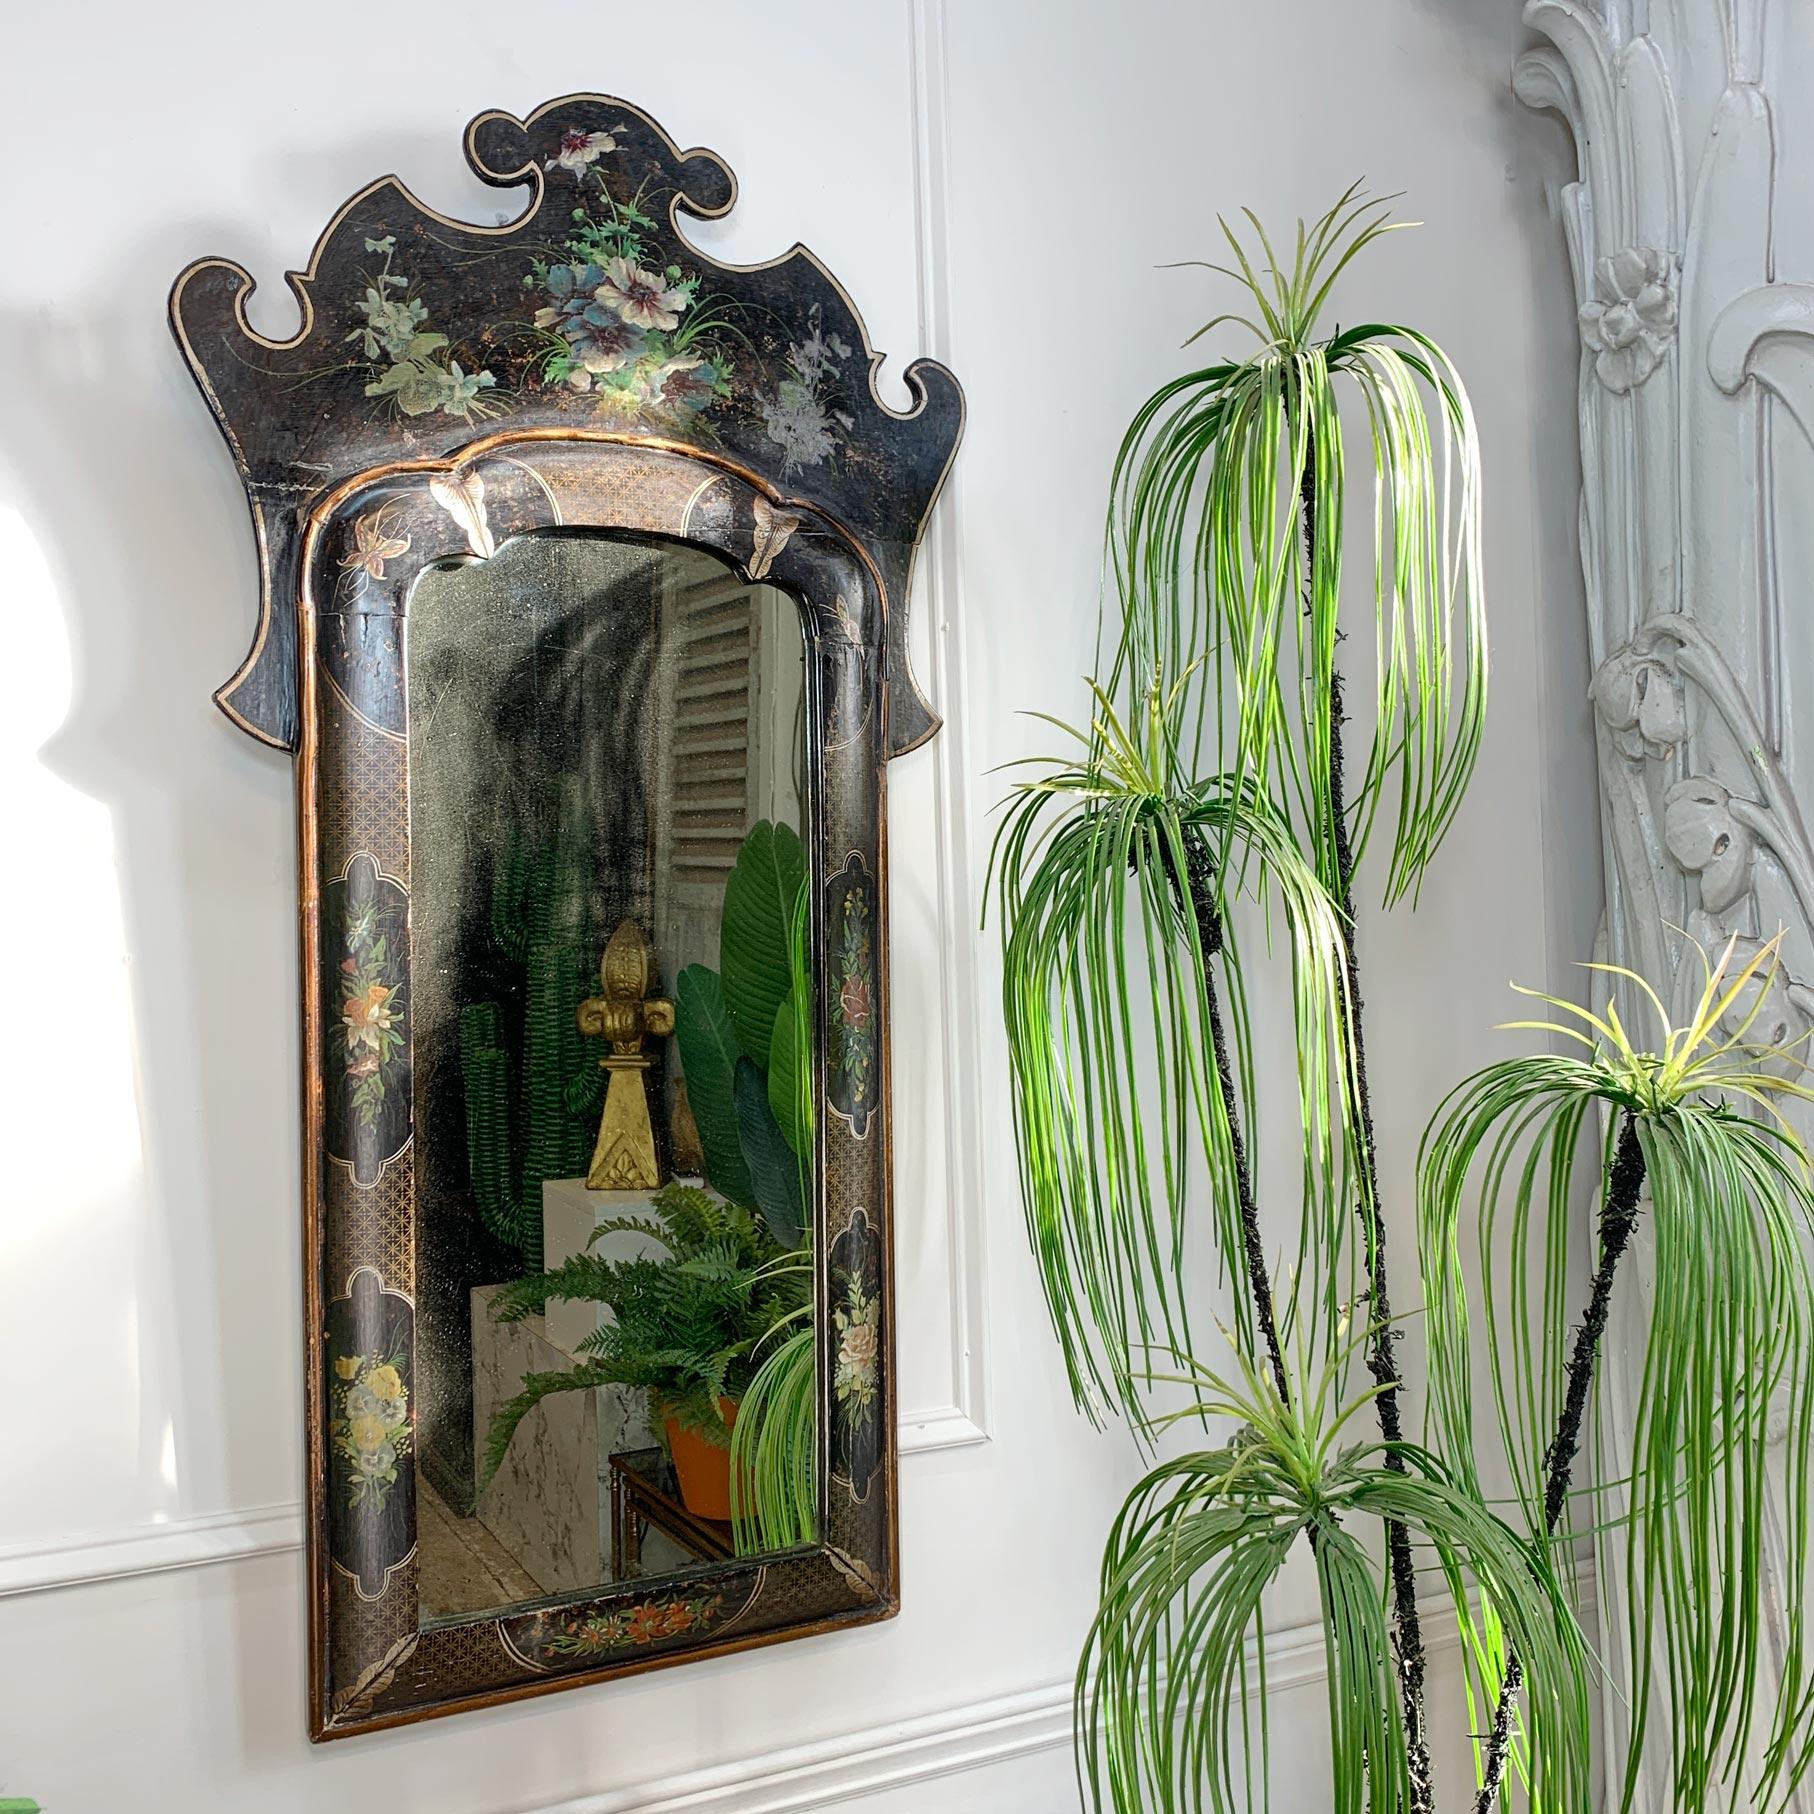 Truly exceptional mirror in the Queen Anne manner, gilt edging and Japanned decorative elements of butterflies and flowers on an ebonised background.

This is an absolutely beautiful mirror and retains its original mercury plate, with some mild